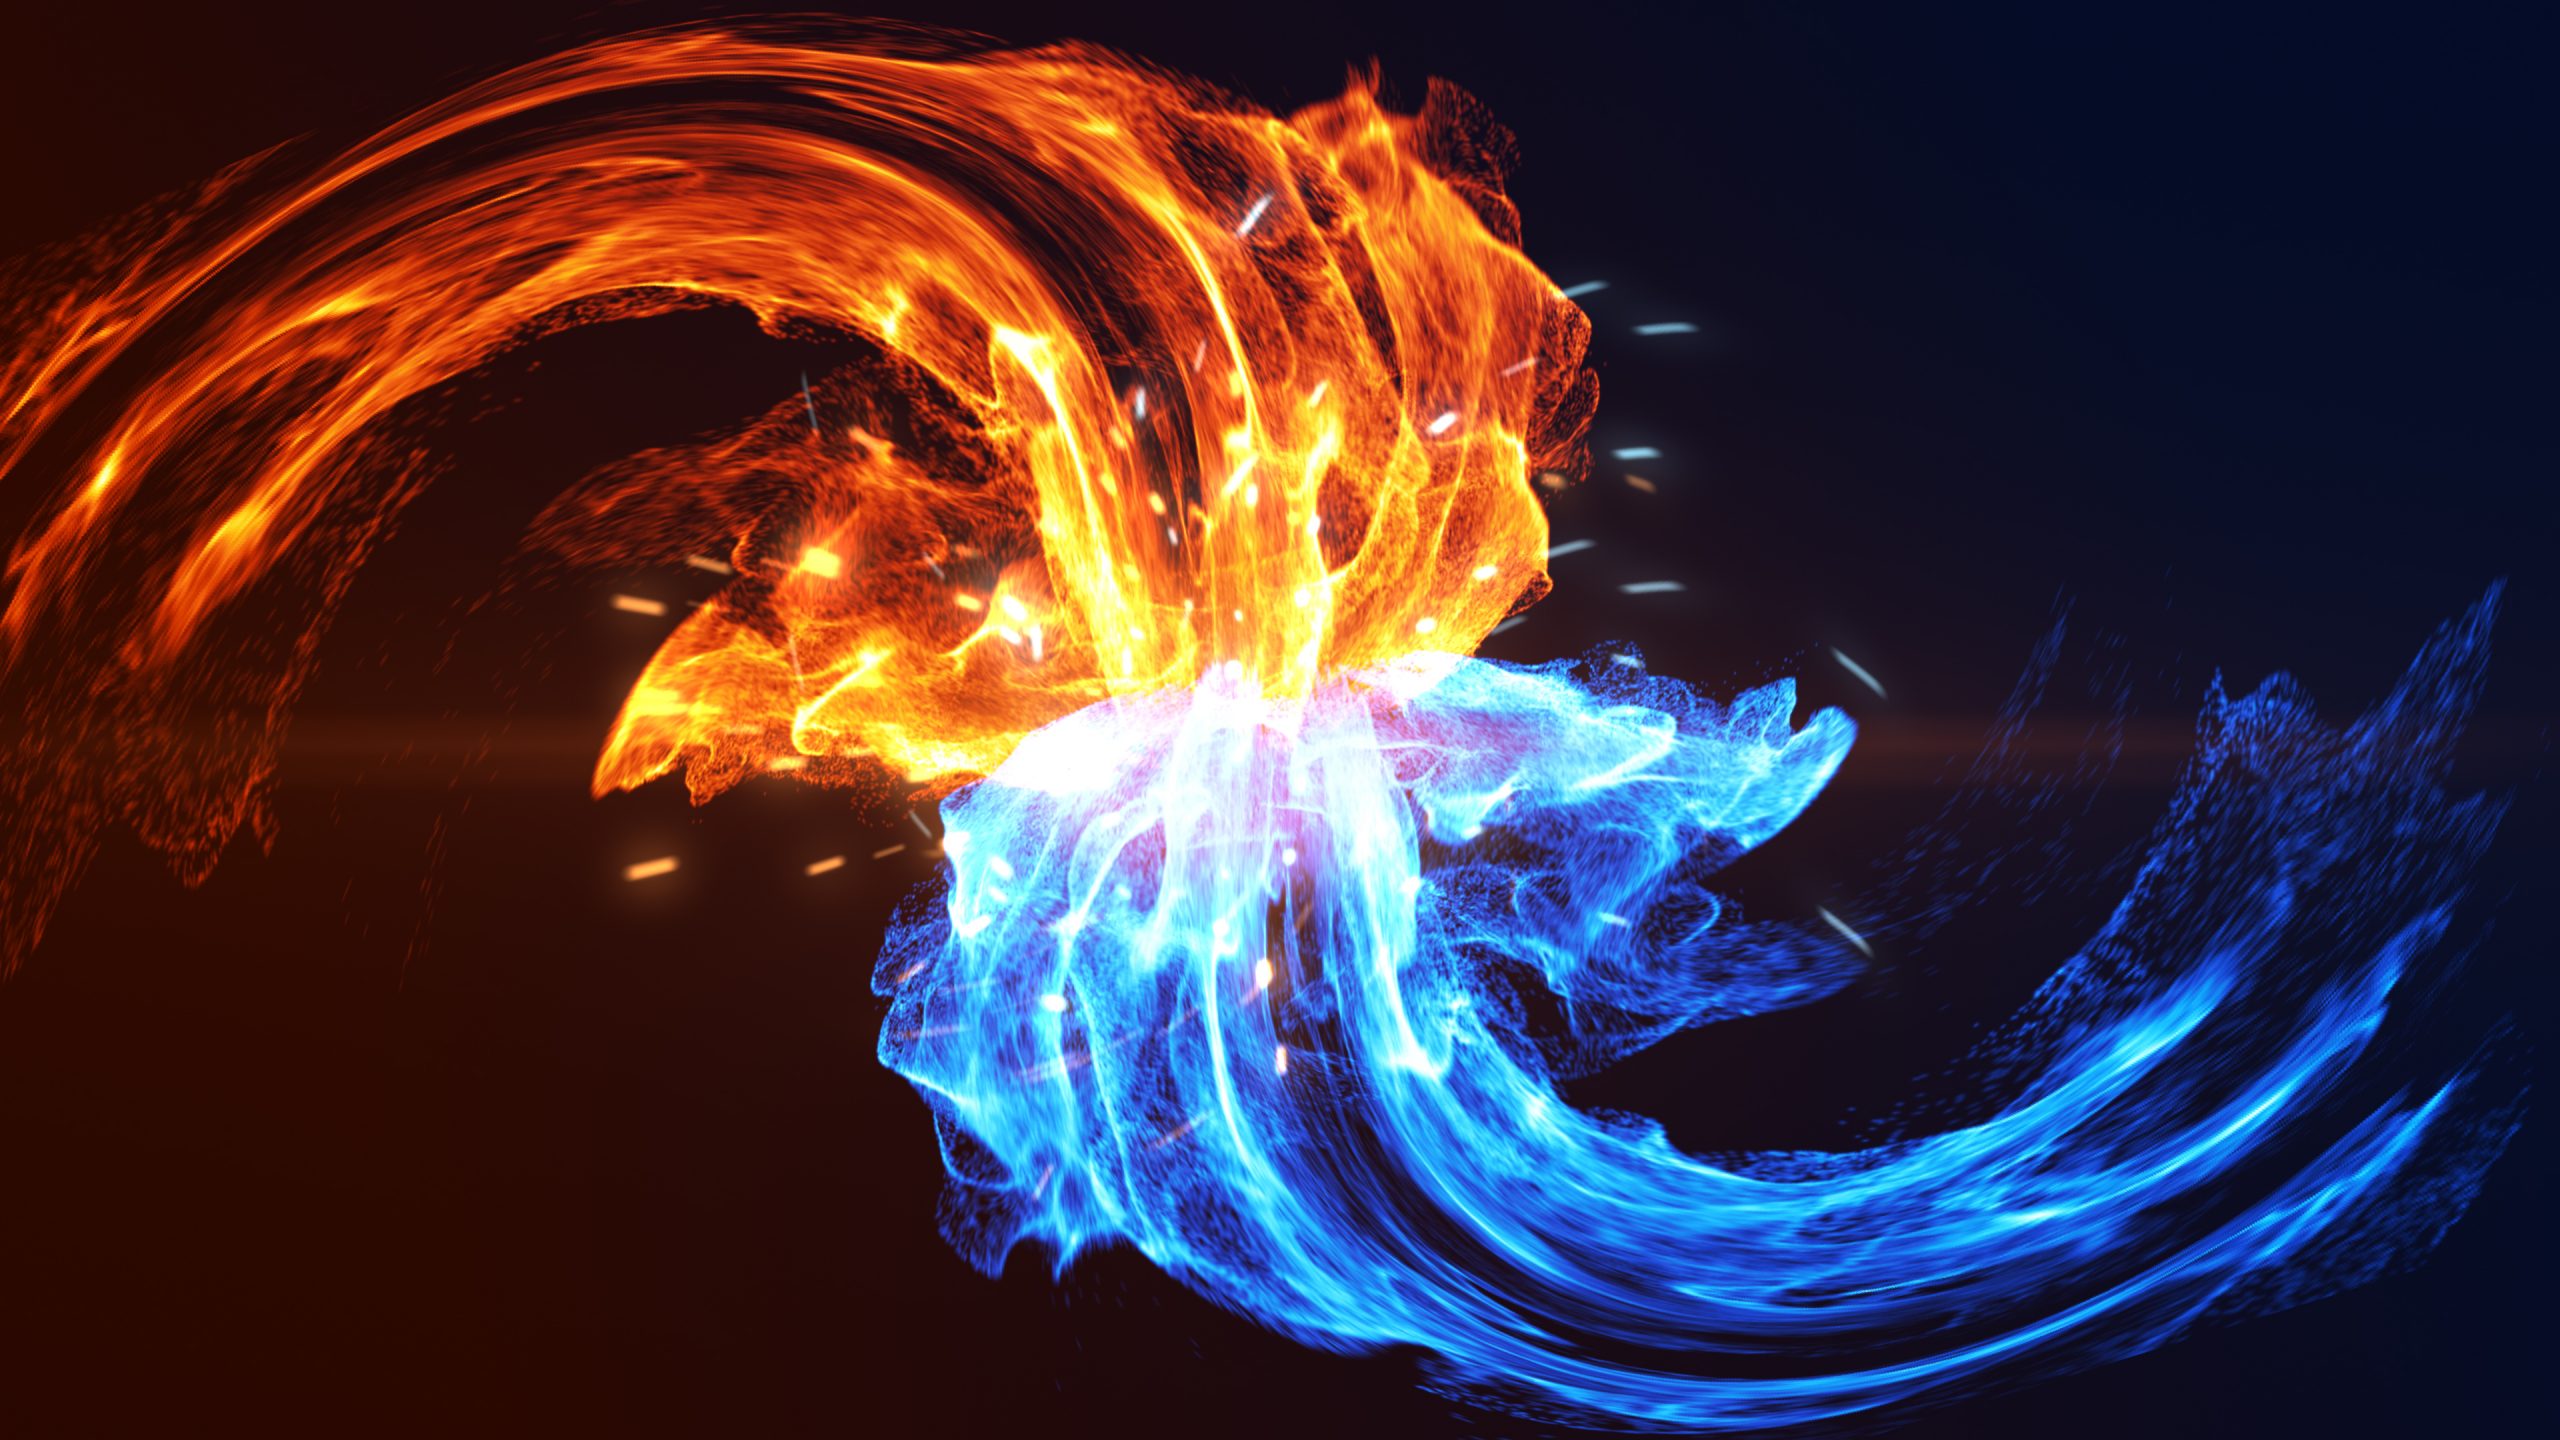 Fire & Ice Winter Festival background image